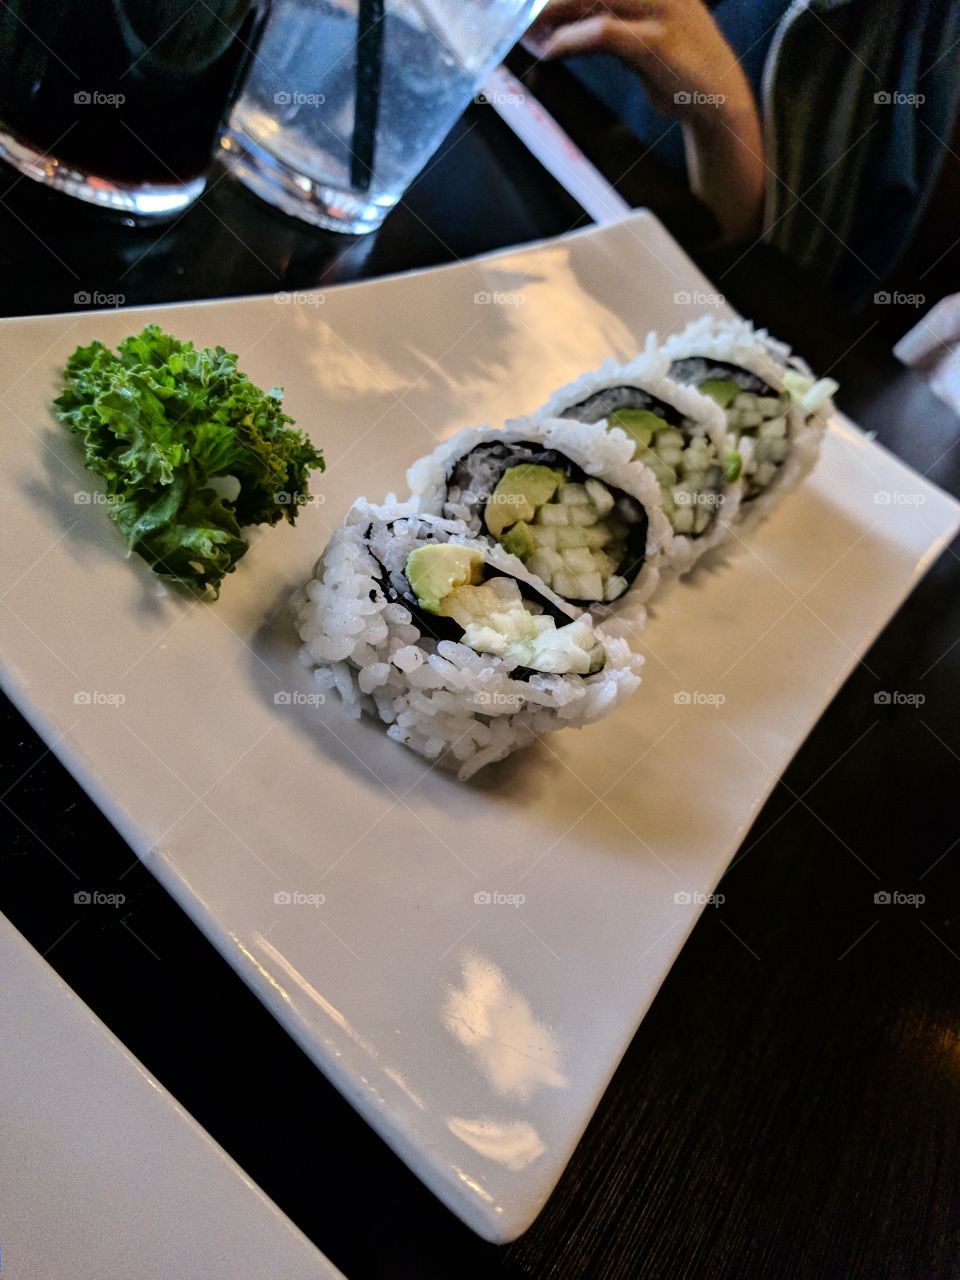 An underexposed avocado roll sits on a sushi plate